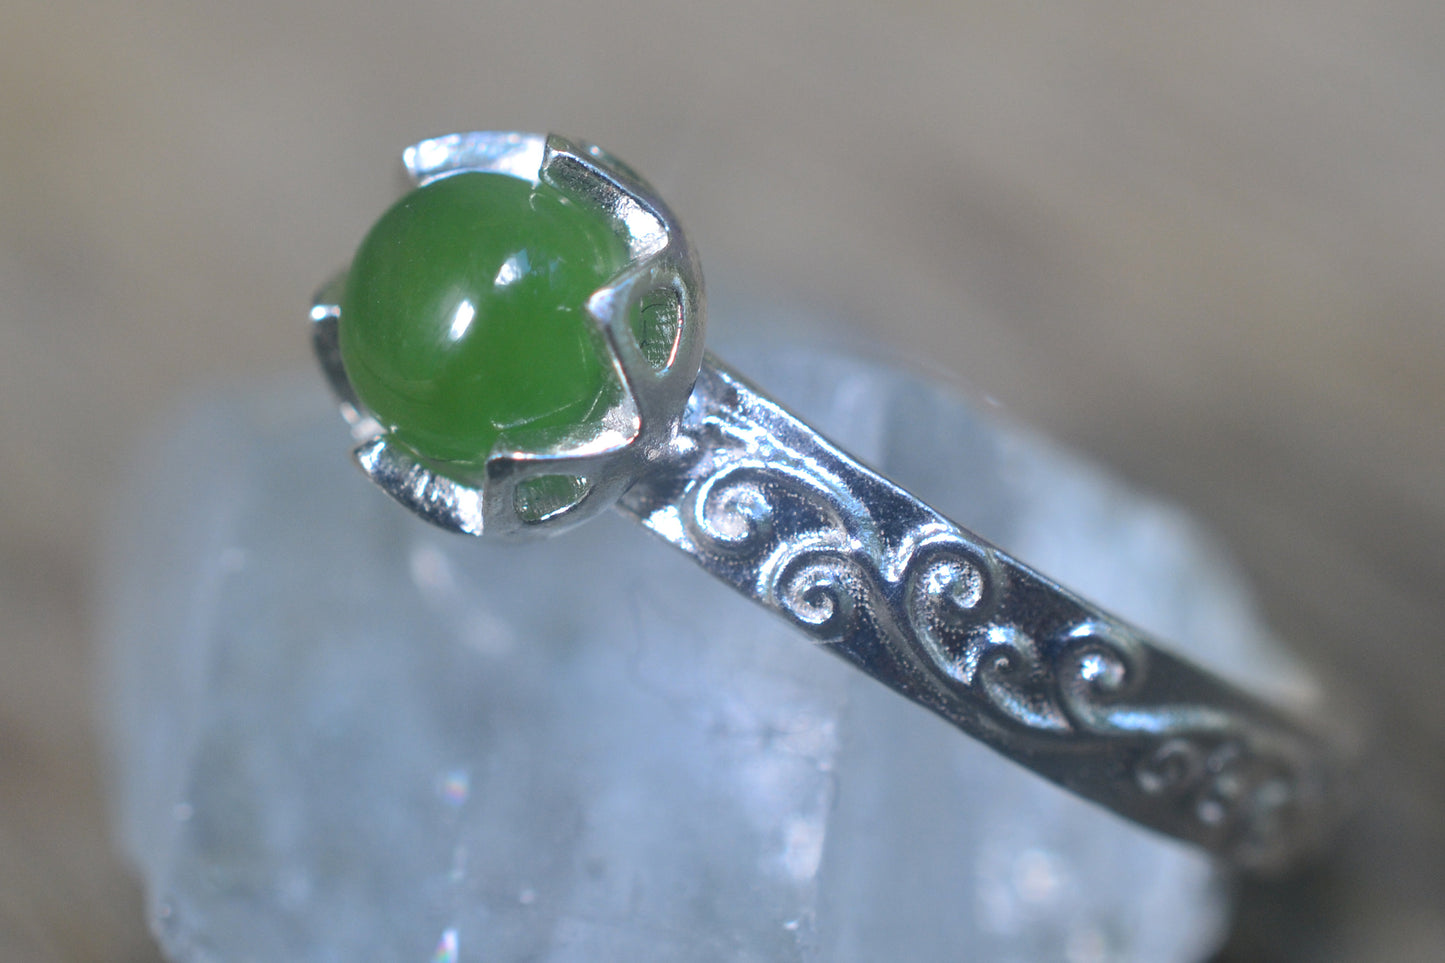 Shiny Silver Swirl Ring With Green Jade Stone